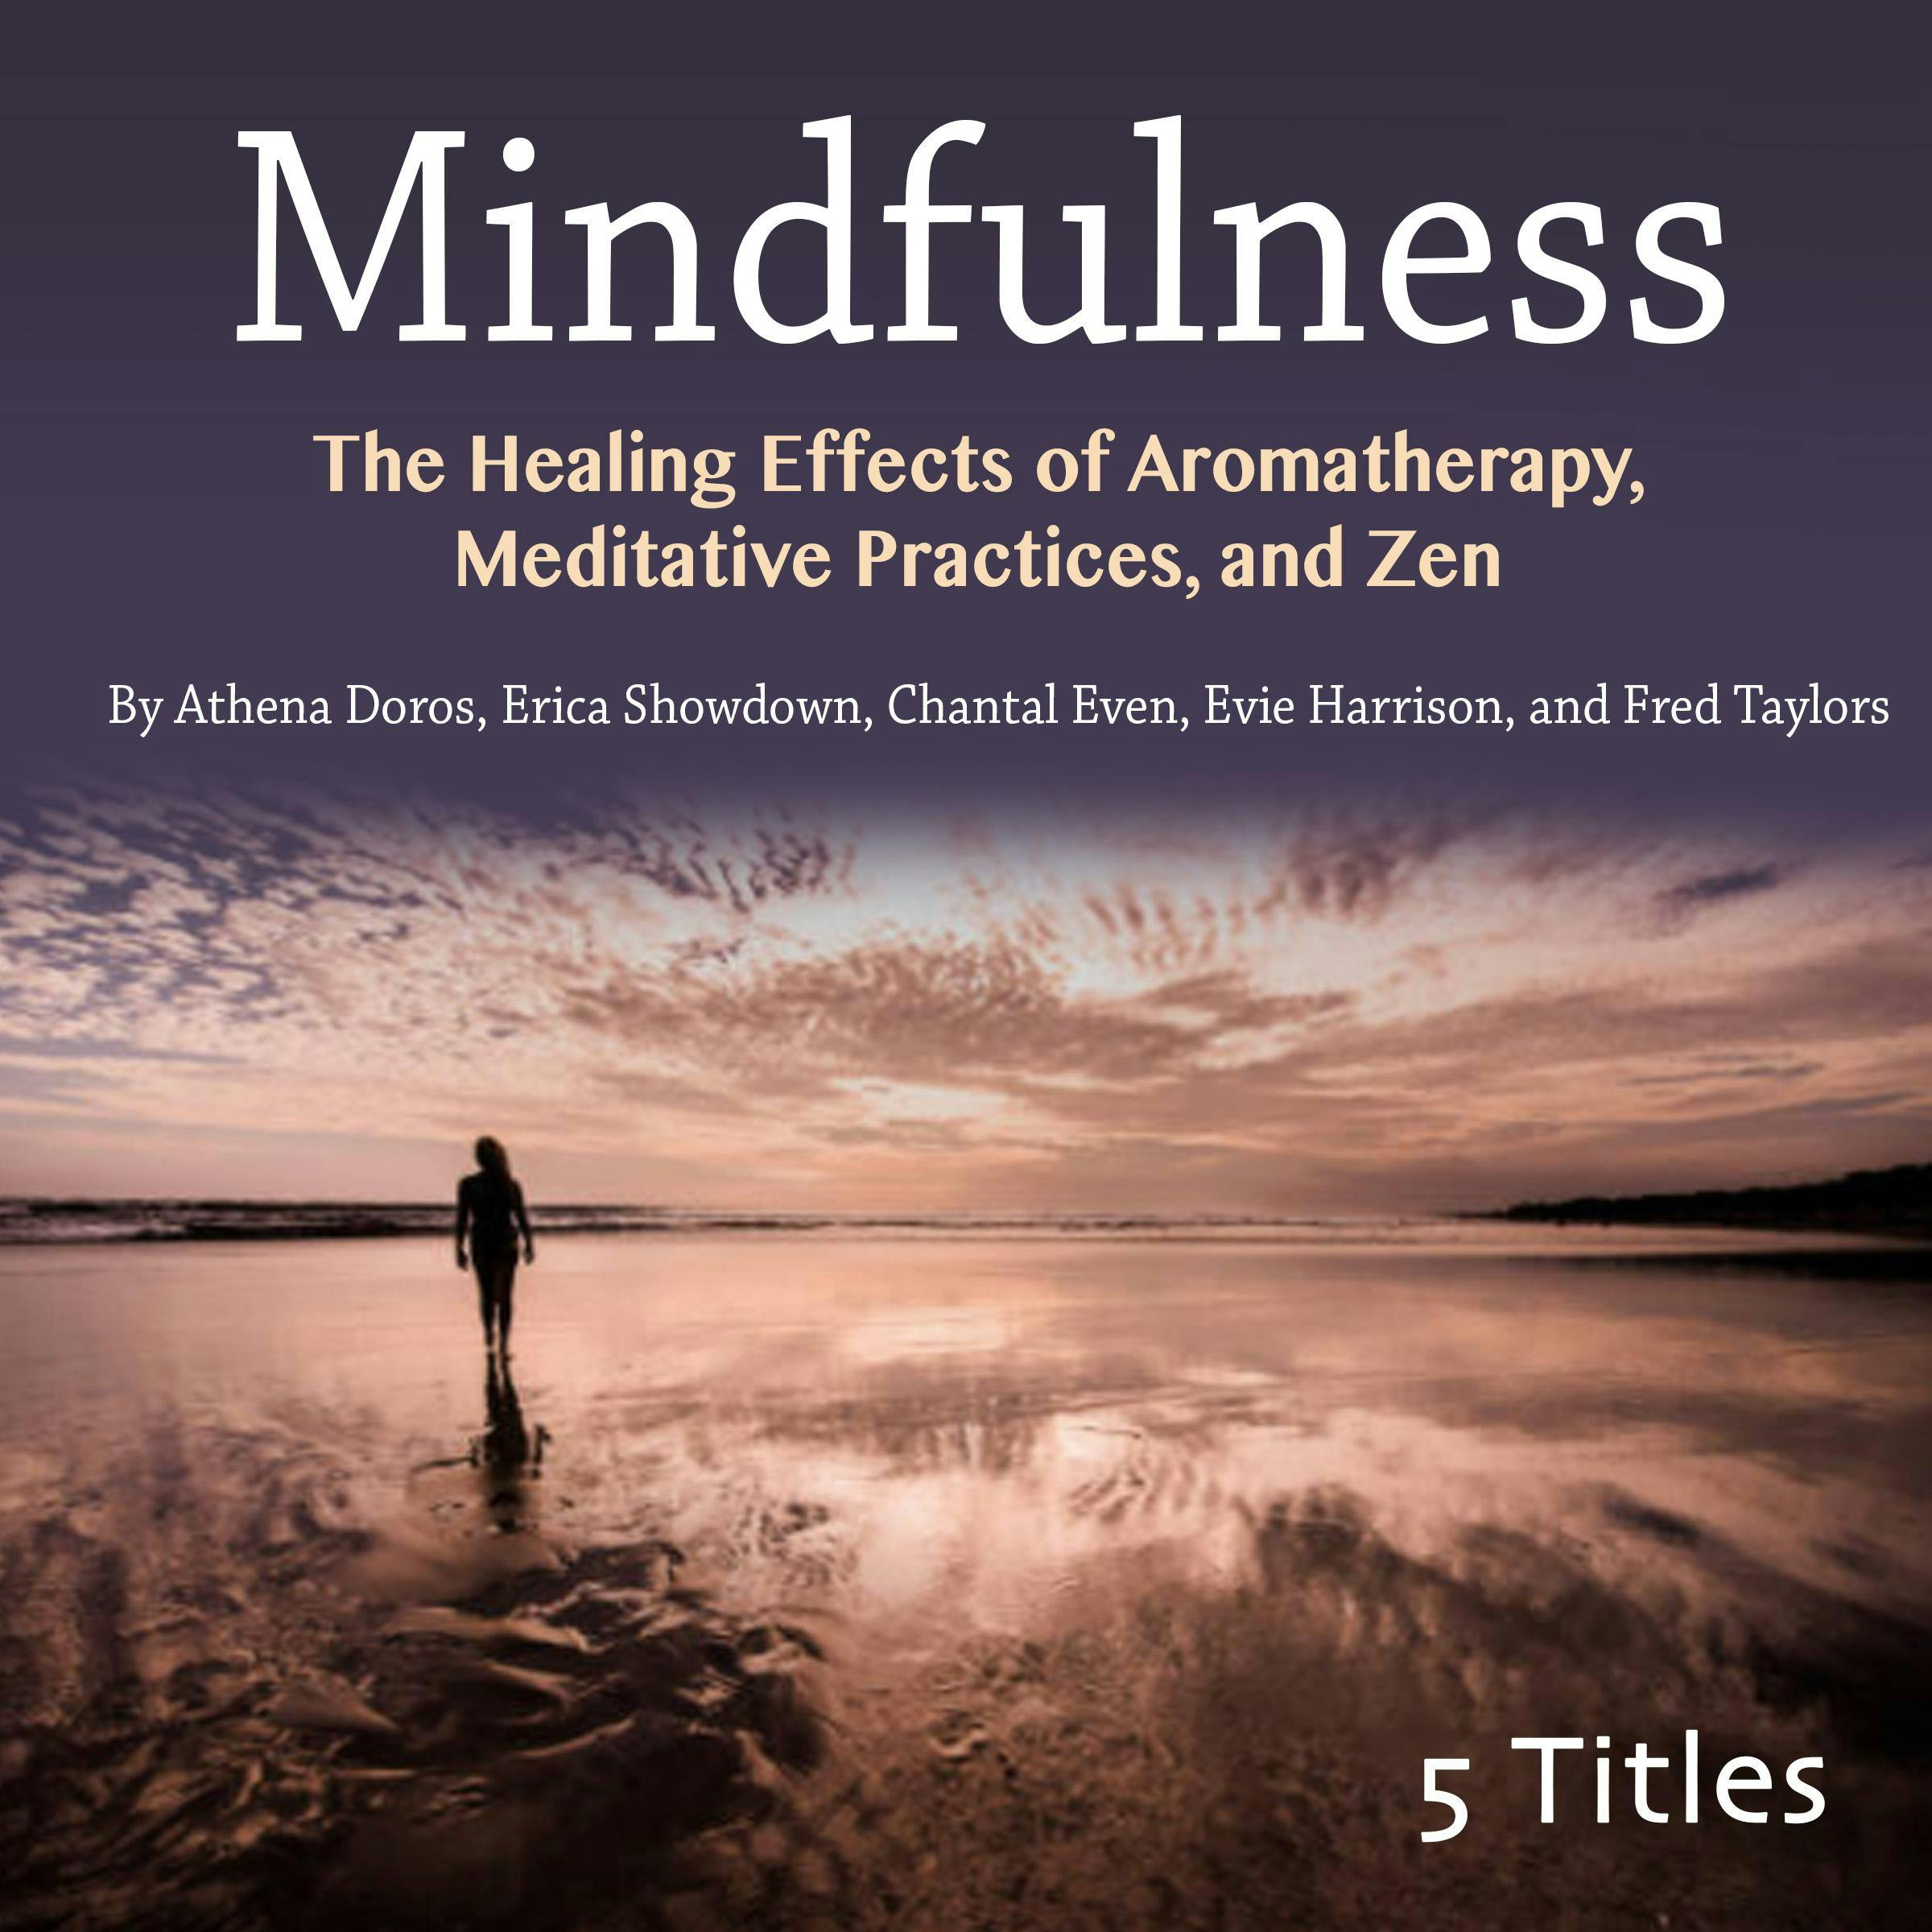 Mindfulness: The Healing Effects of Aromatherapy, Meditative Practices, and Zen - Athena Doros, Fred Taylors, Erica Showdown, Chantal Even, Evie Harrison